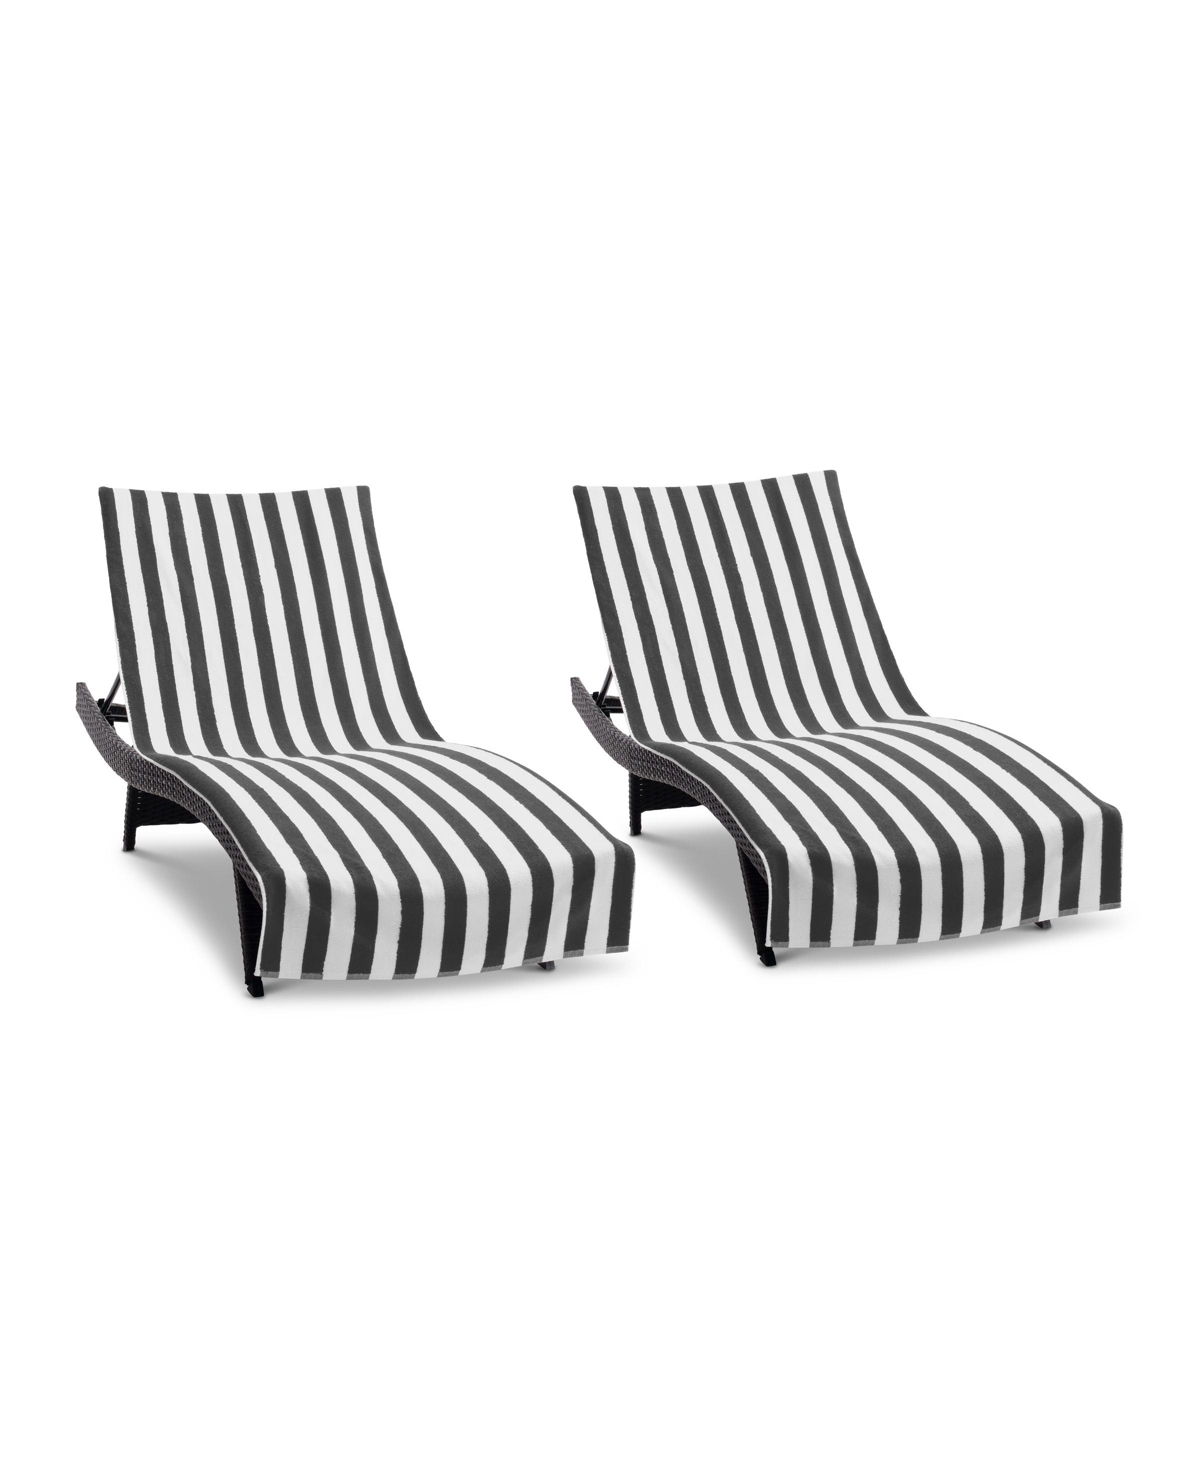 California Cabana Chaise Lounge Covers (2 Pack), Striped Color Options, 30x85 in. with 8" Fitted Pocket for Beach or Pool Chair - Black